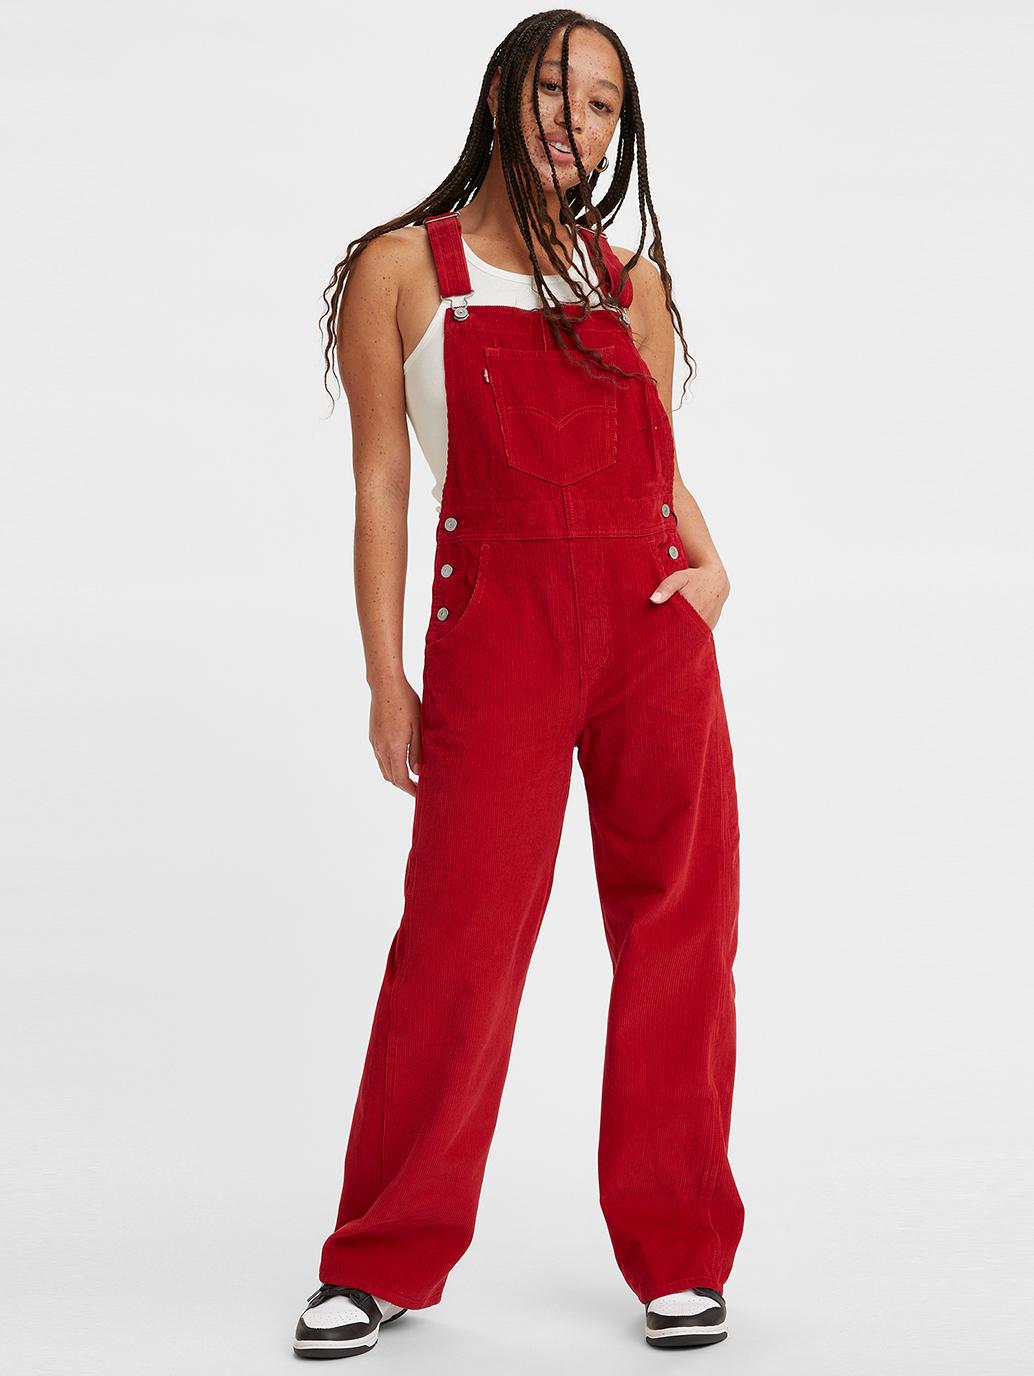 Levi's® Hong Kong x verdy girls dont cry corduroy womens overalls A22500000 13 Details